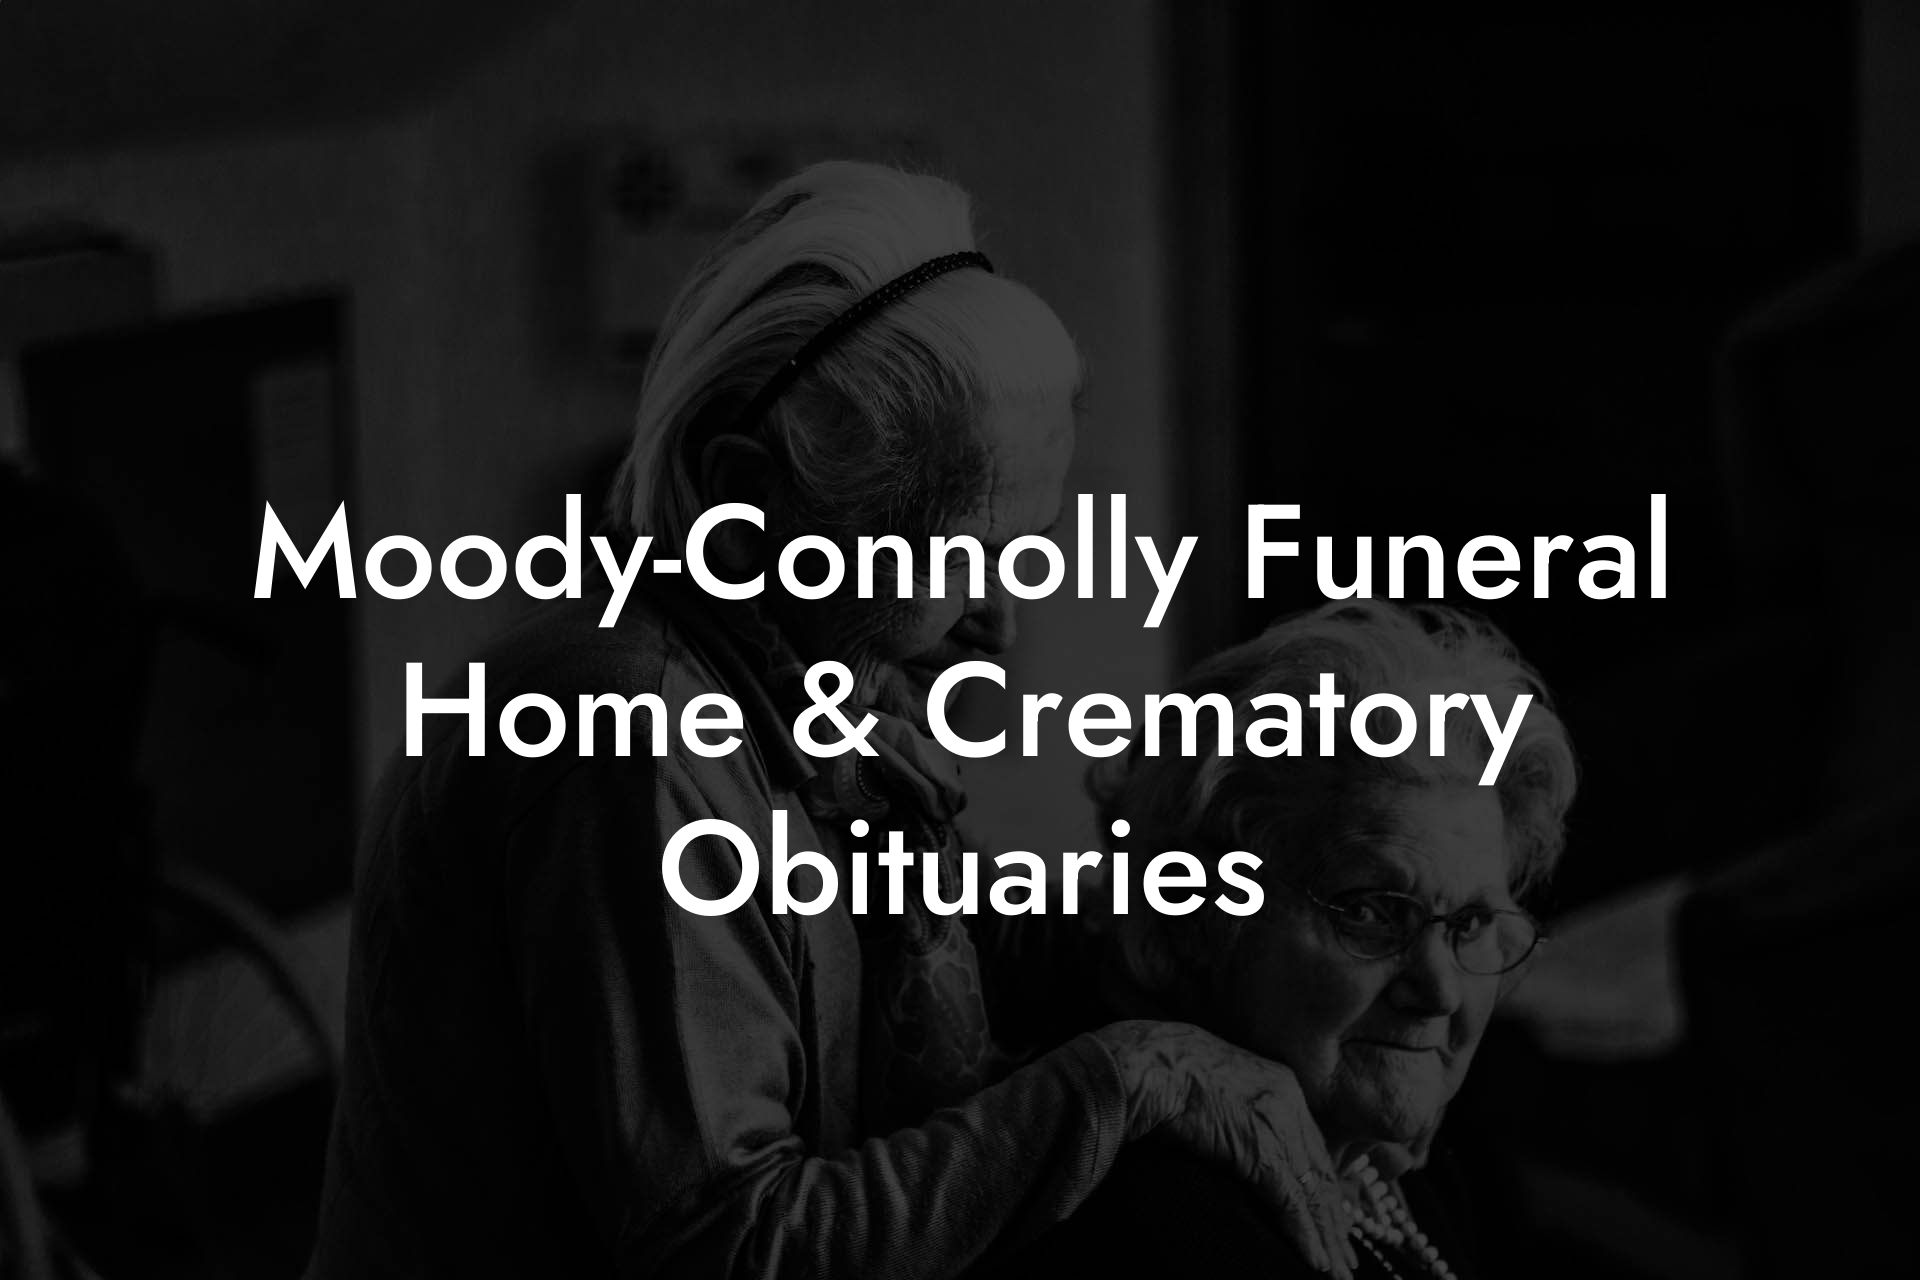 Moody-Connolly Funeral Home & Crematory Obituaries